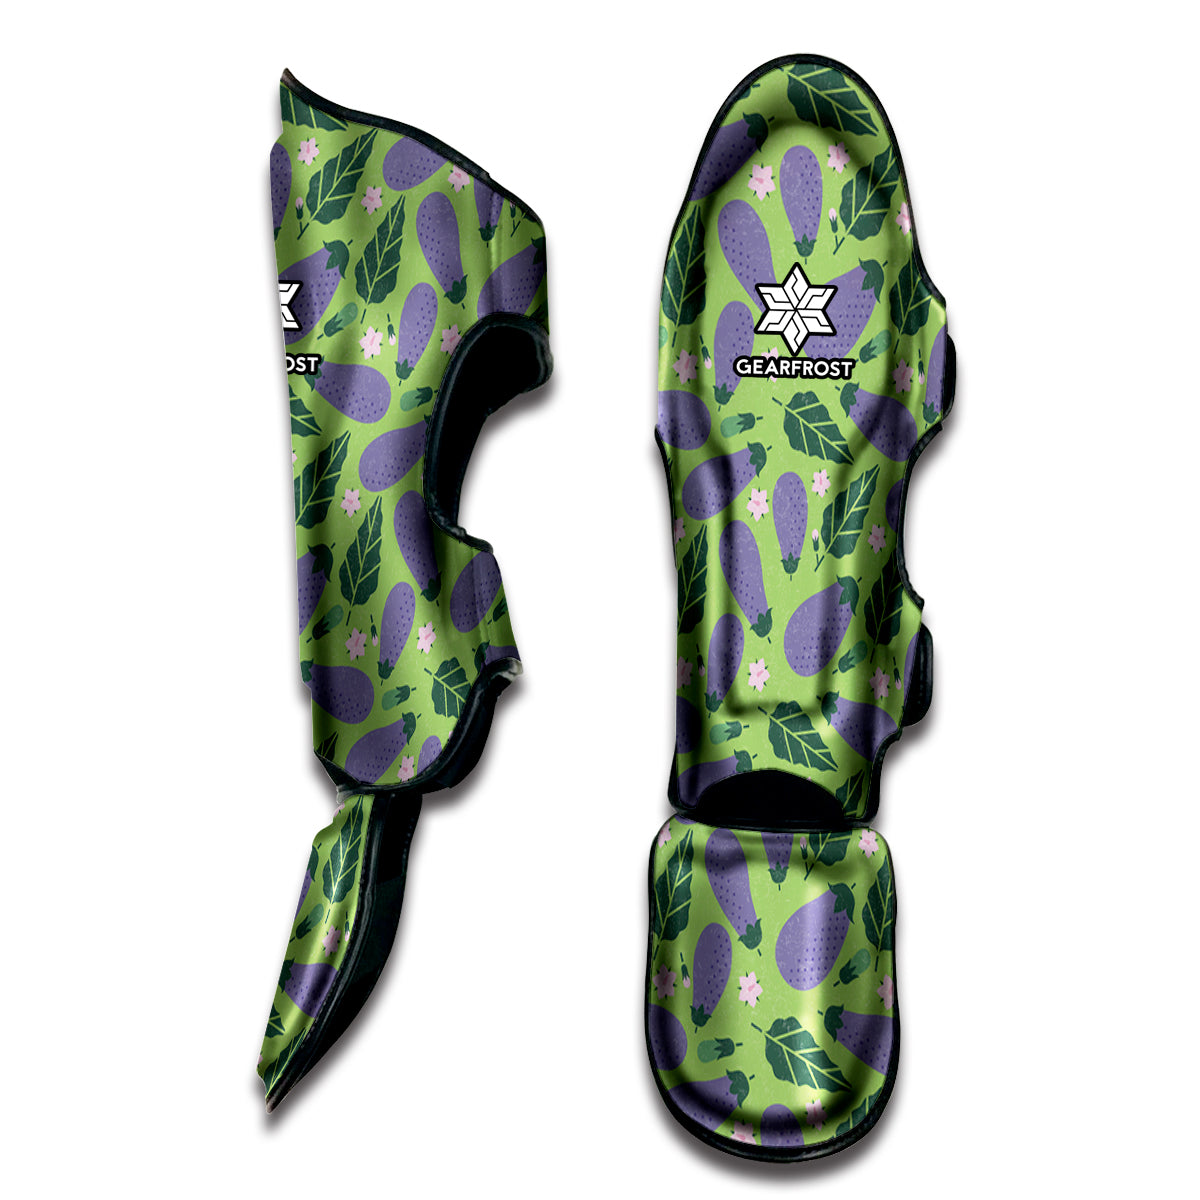 Eggplant With Leaves And Flowers Print Muay Thai Shin Guard